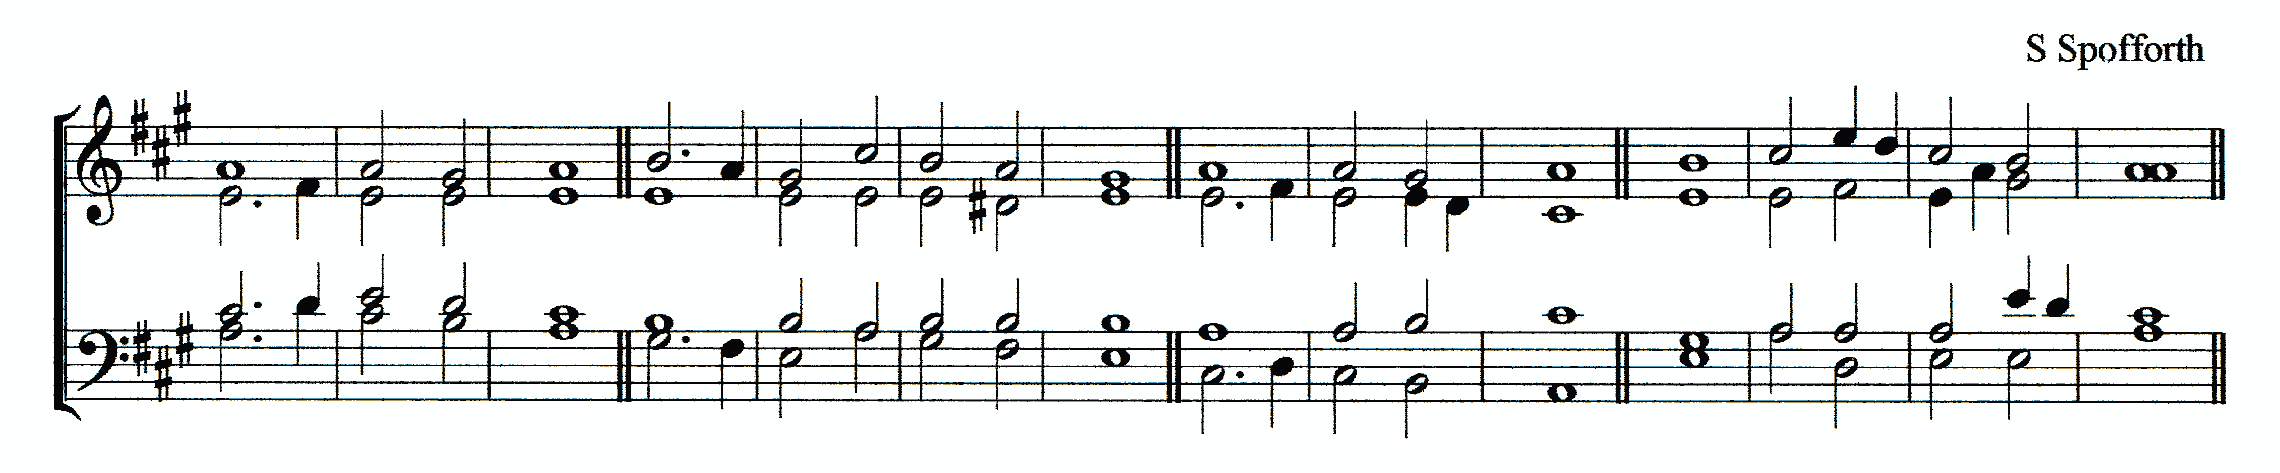 Double chant in A major by Samuel Spofforth